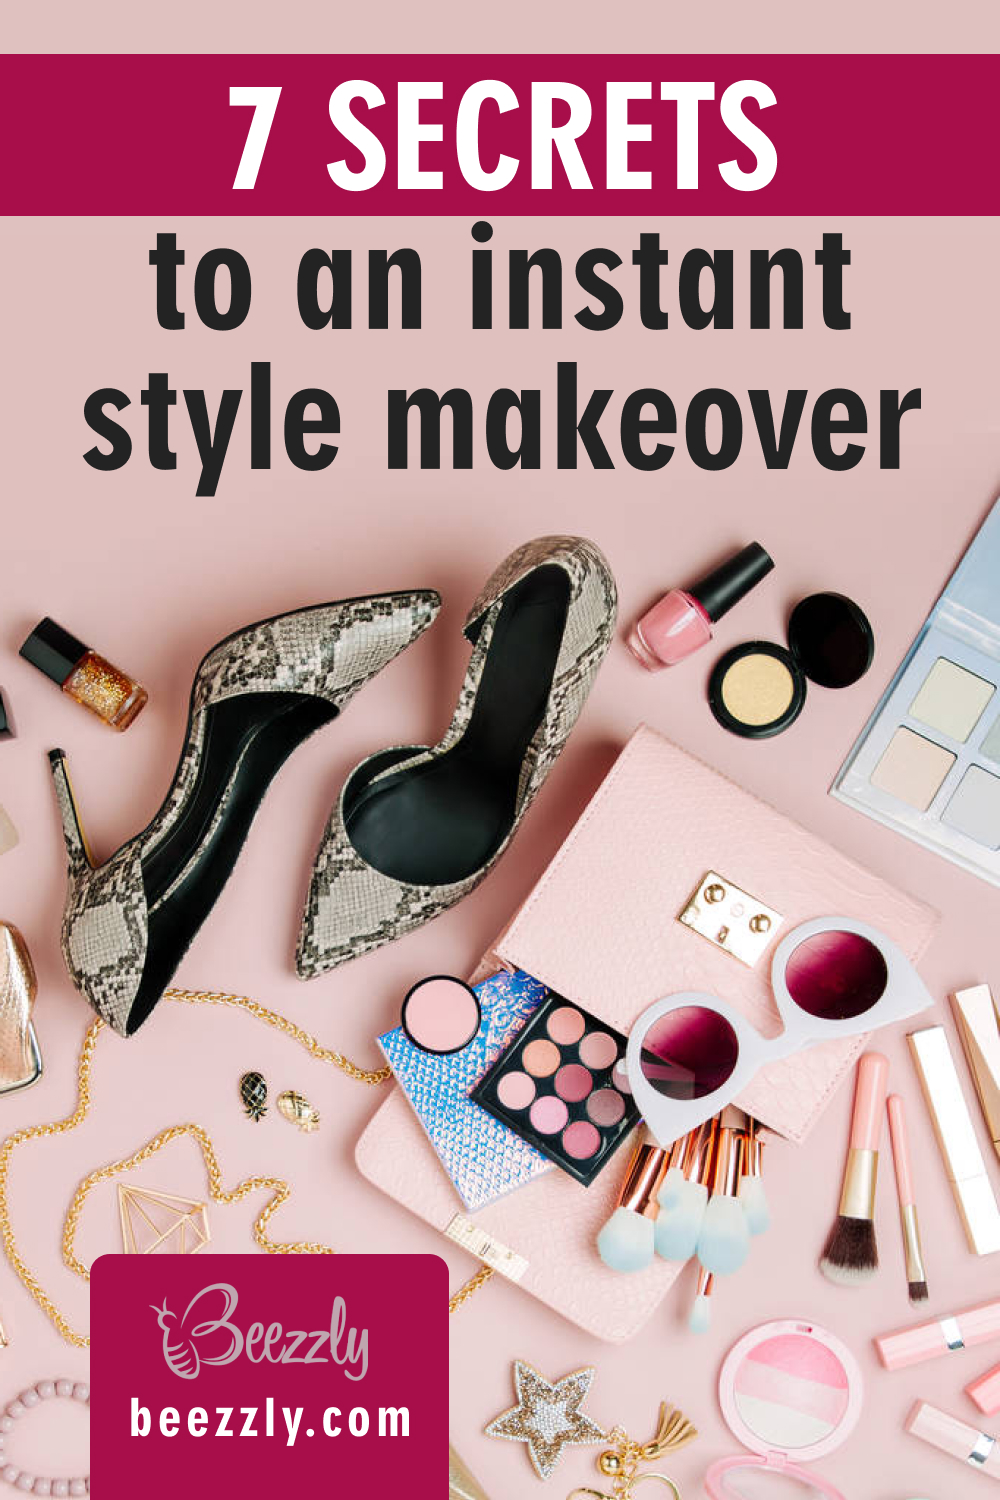 7 Secrets to an Instant Style Makeover